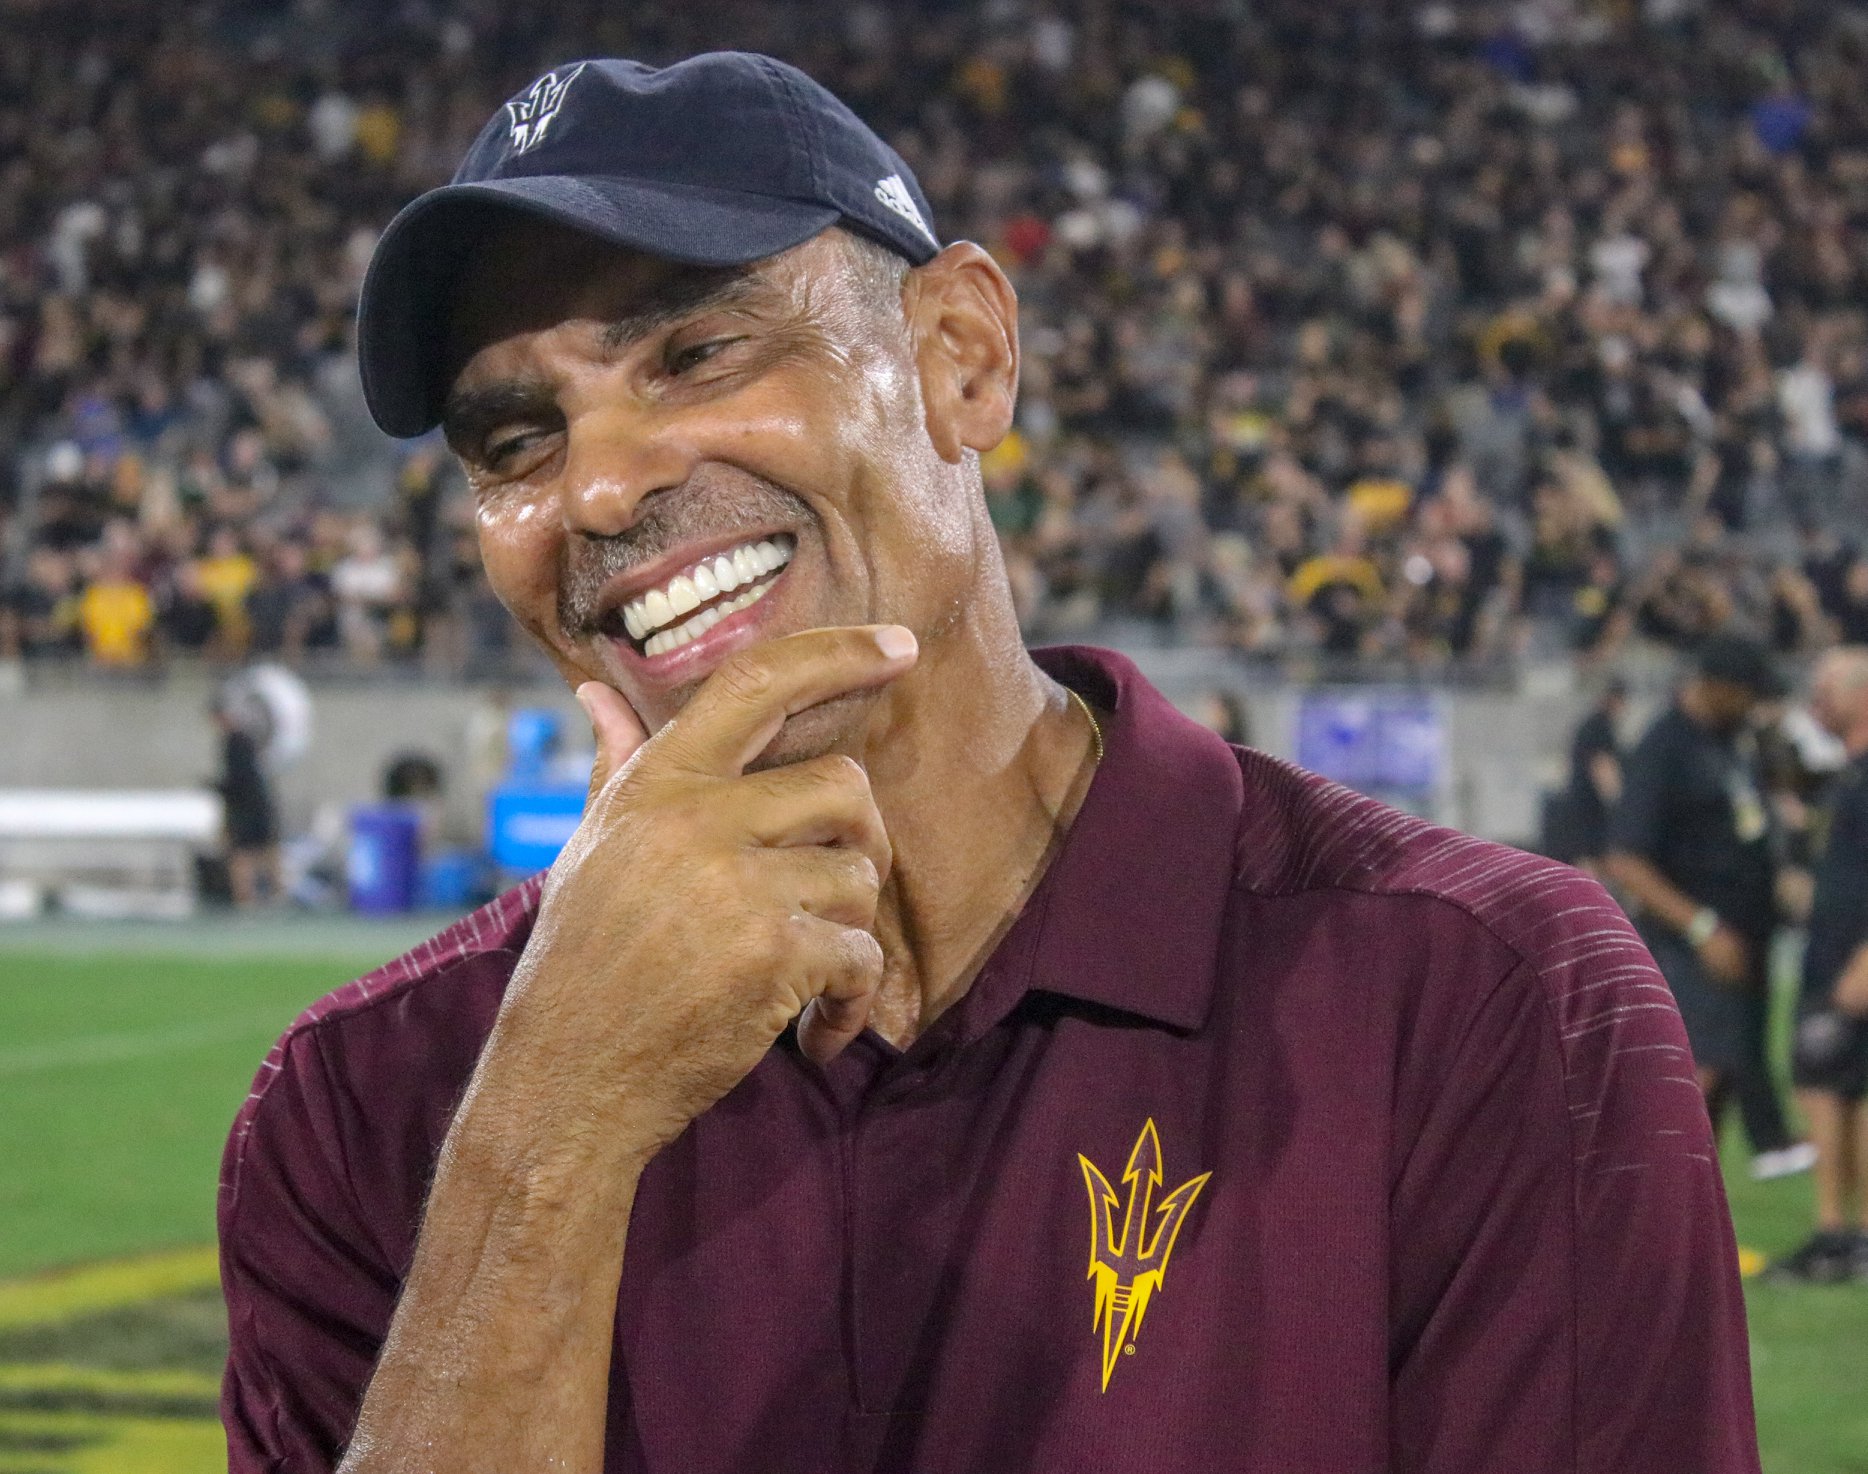 ASU Football Opinion: We may have underestimated what Herm Edwards can do -  Cronkite Sports